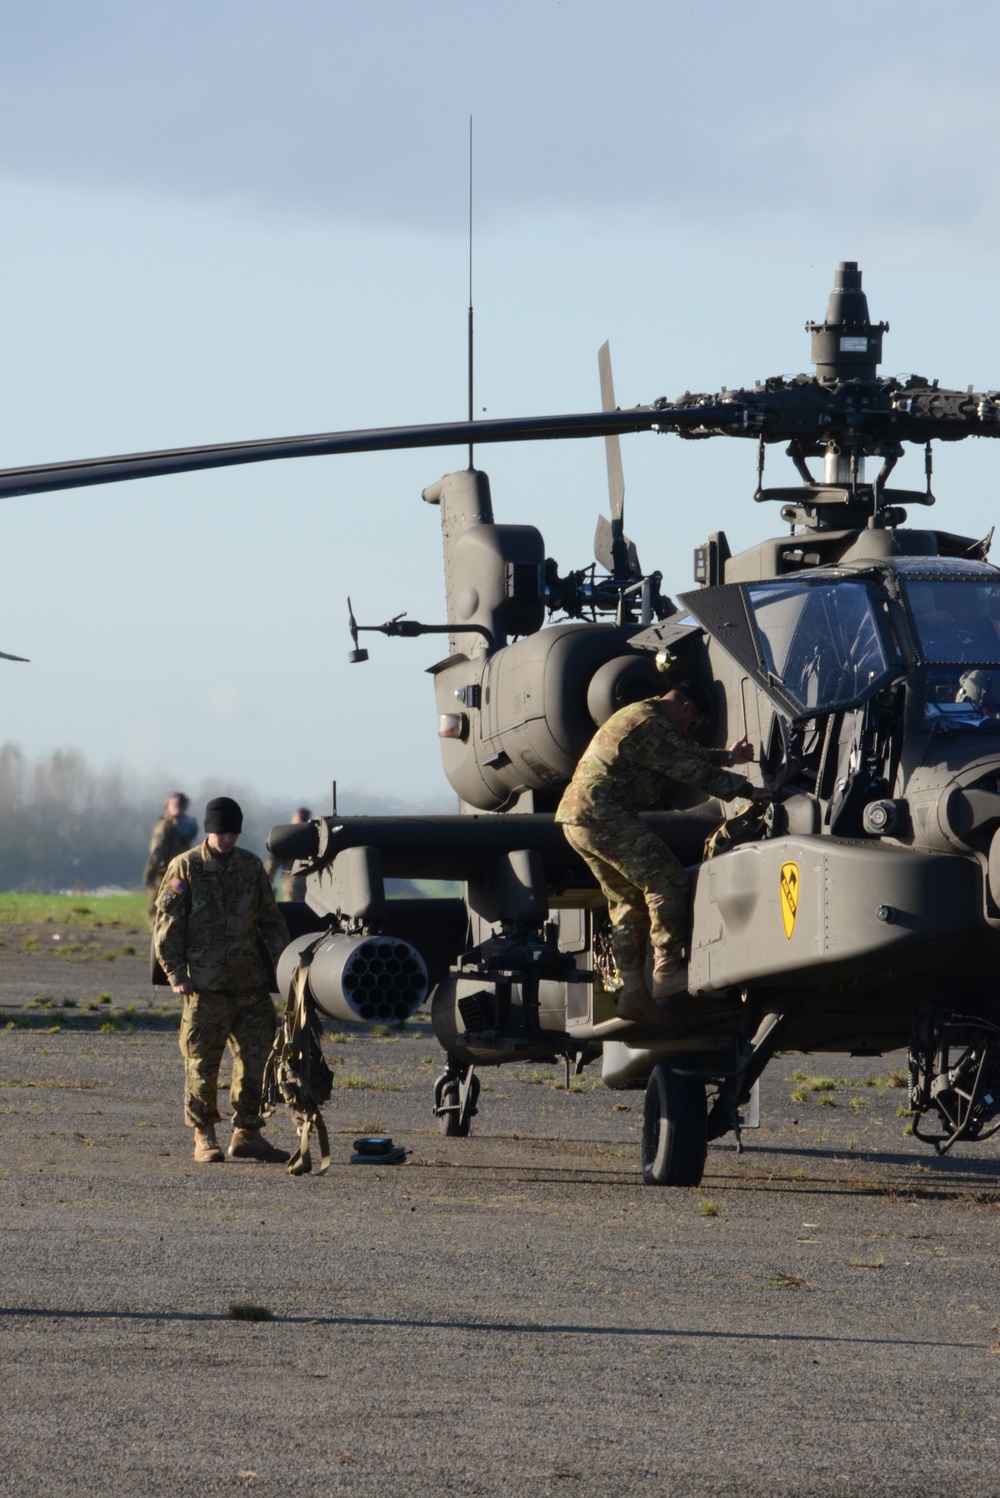 1st Air Cavalry Brigade, 1st Cavalry Division on Chièvres Air Base, Belgium during the Operation Atlantic Resolve